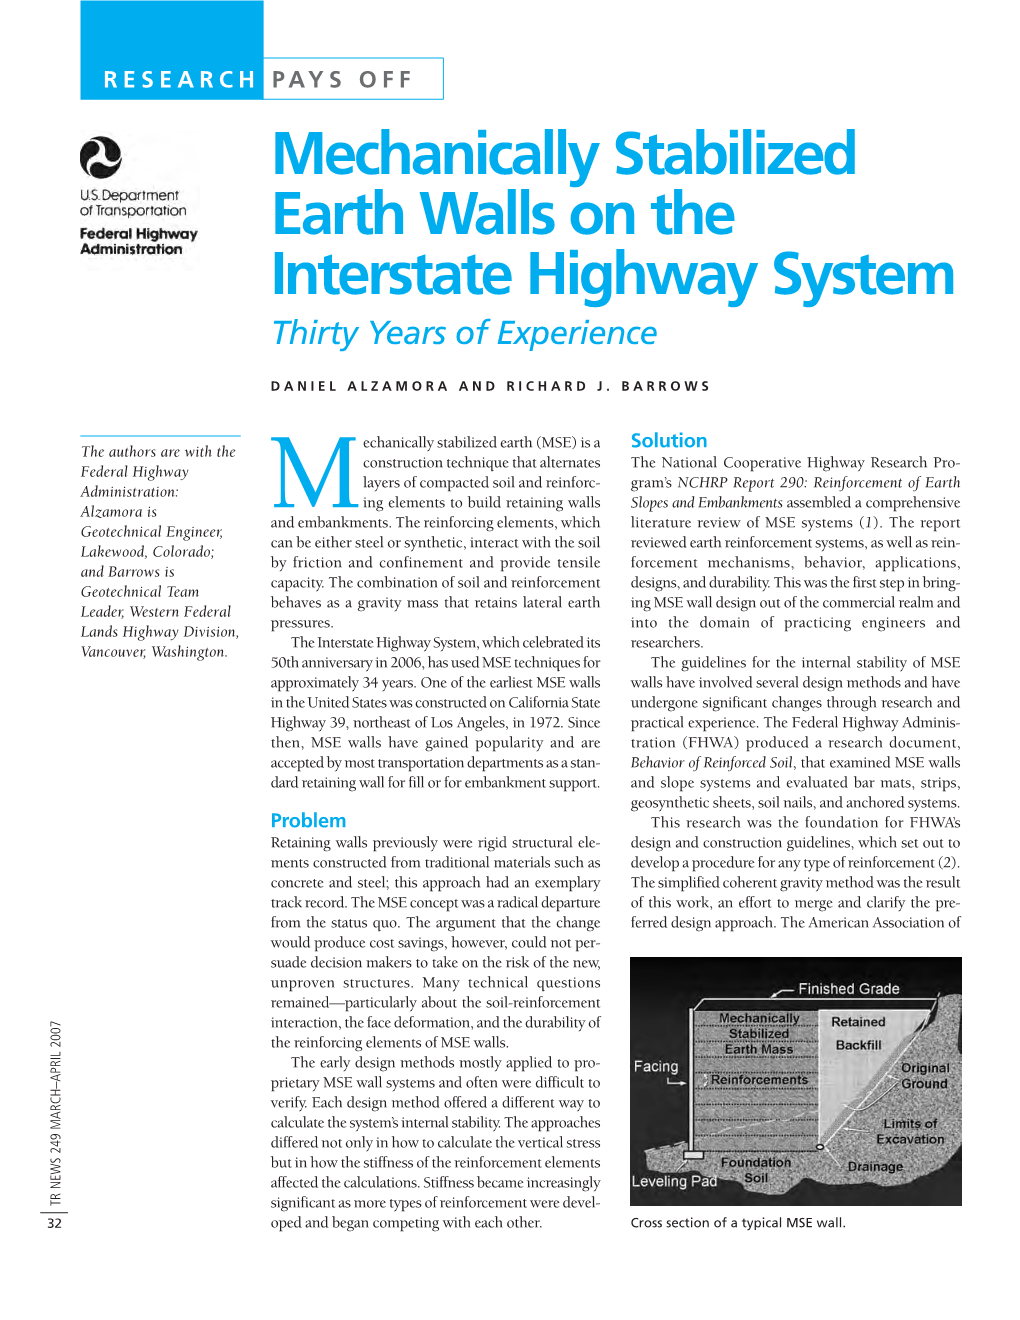 Mechanically Stabilized Earth Walls on the Interstate Highway System